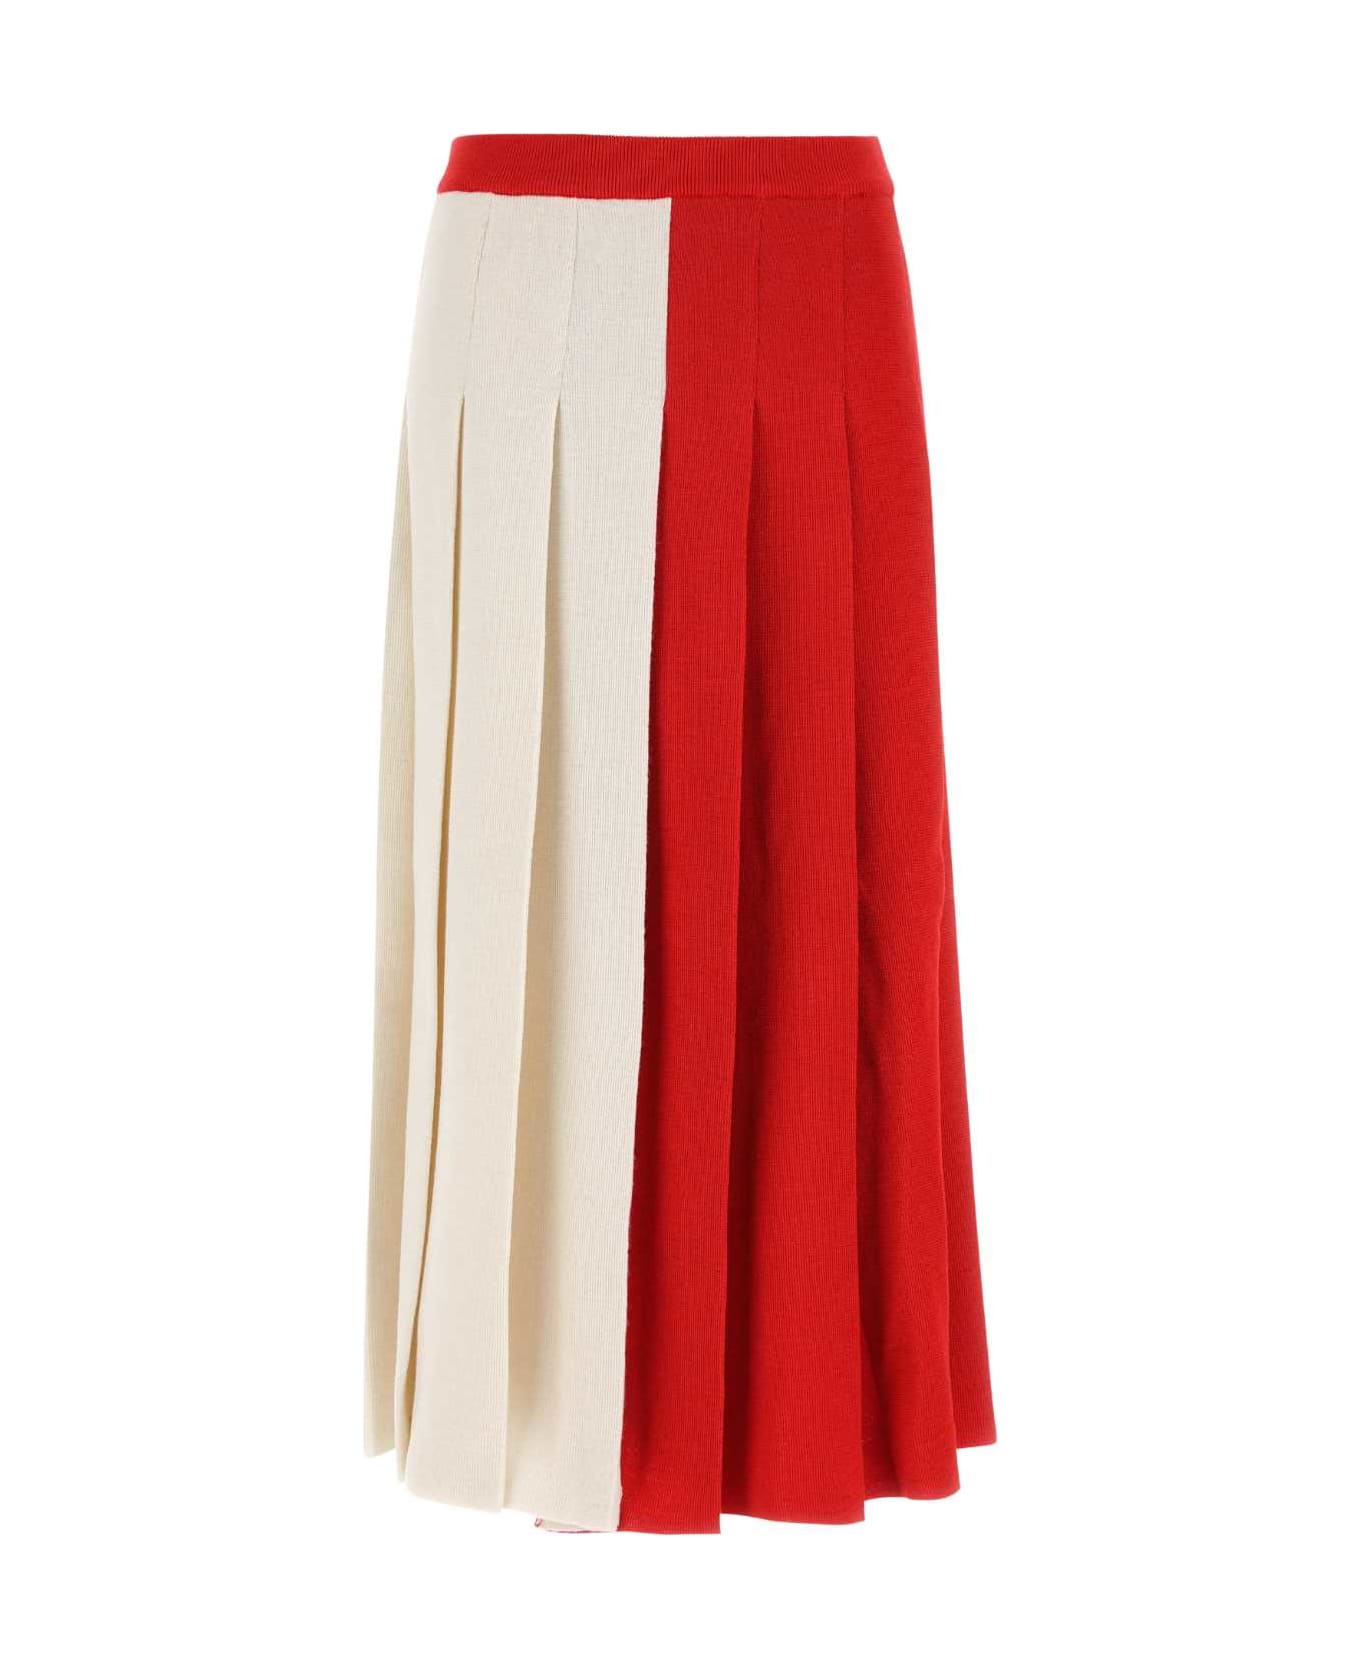 Gucci Two-tone Wool Skirt - Multicolor